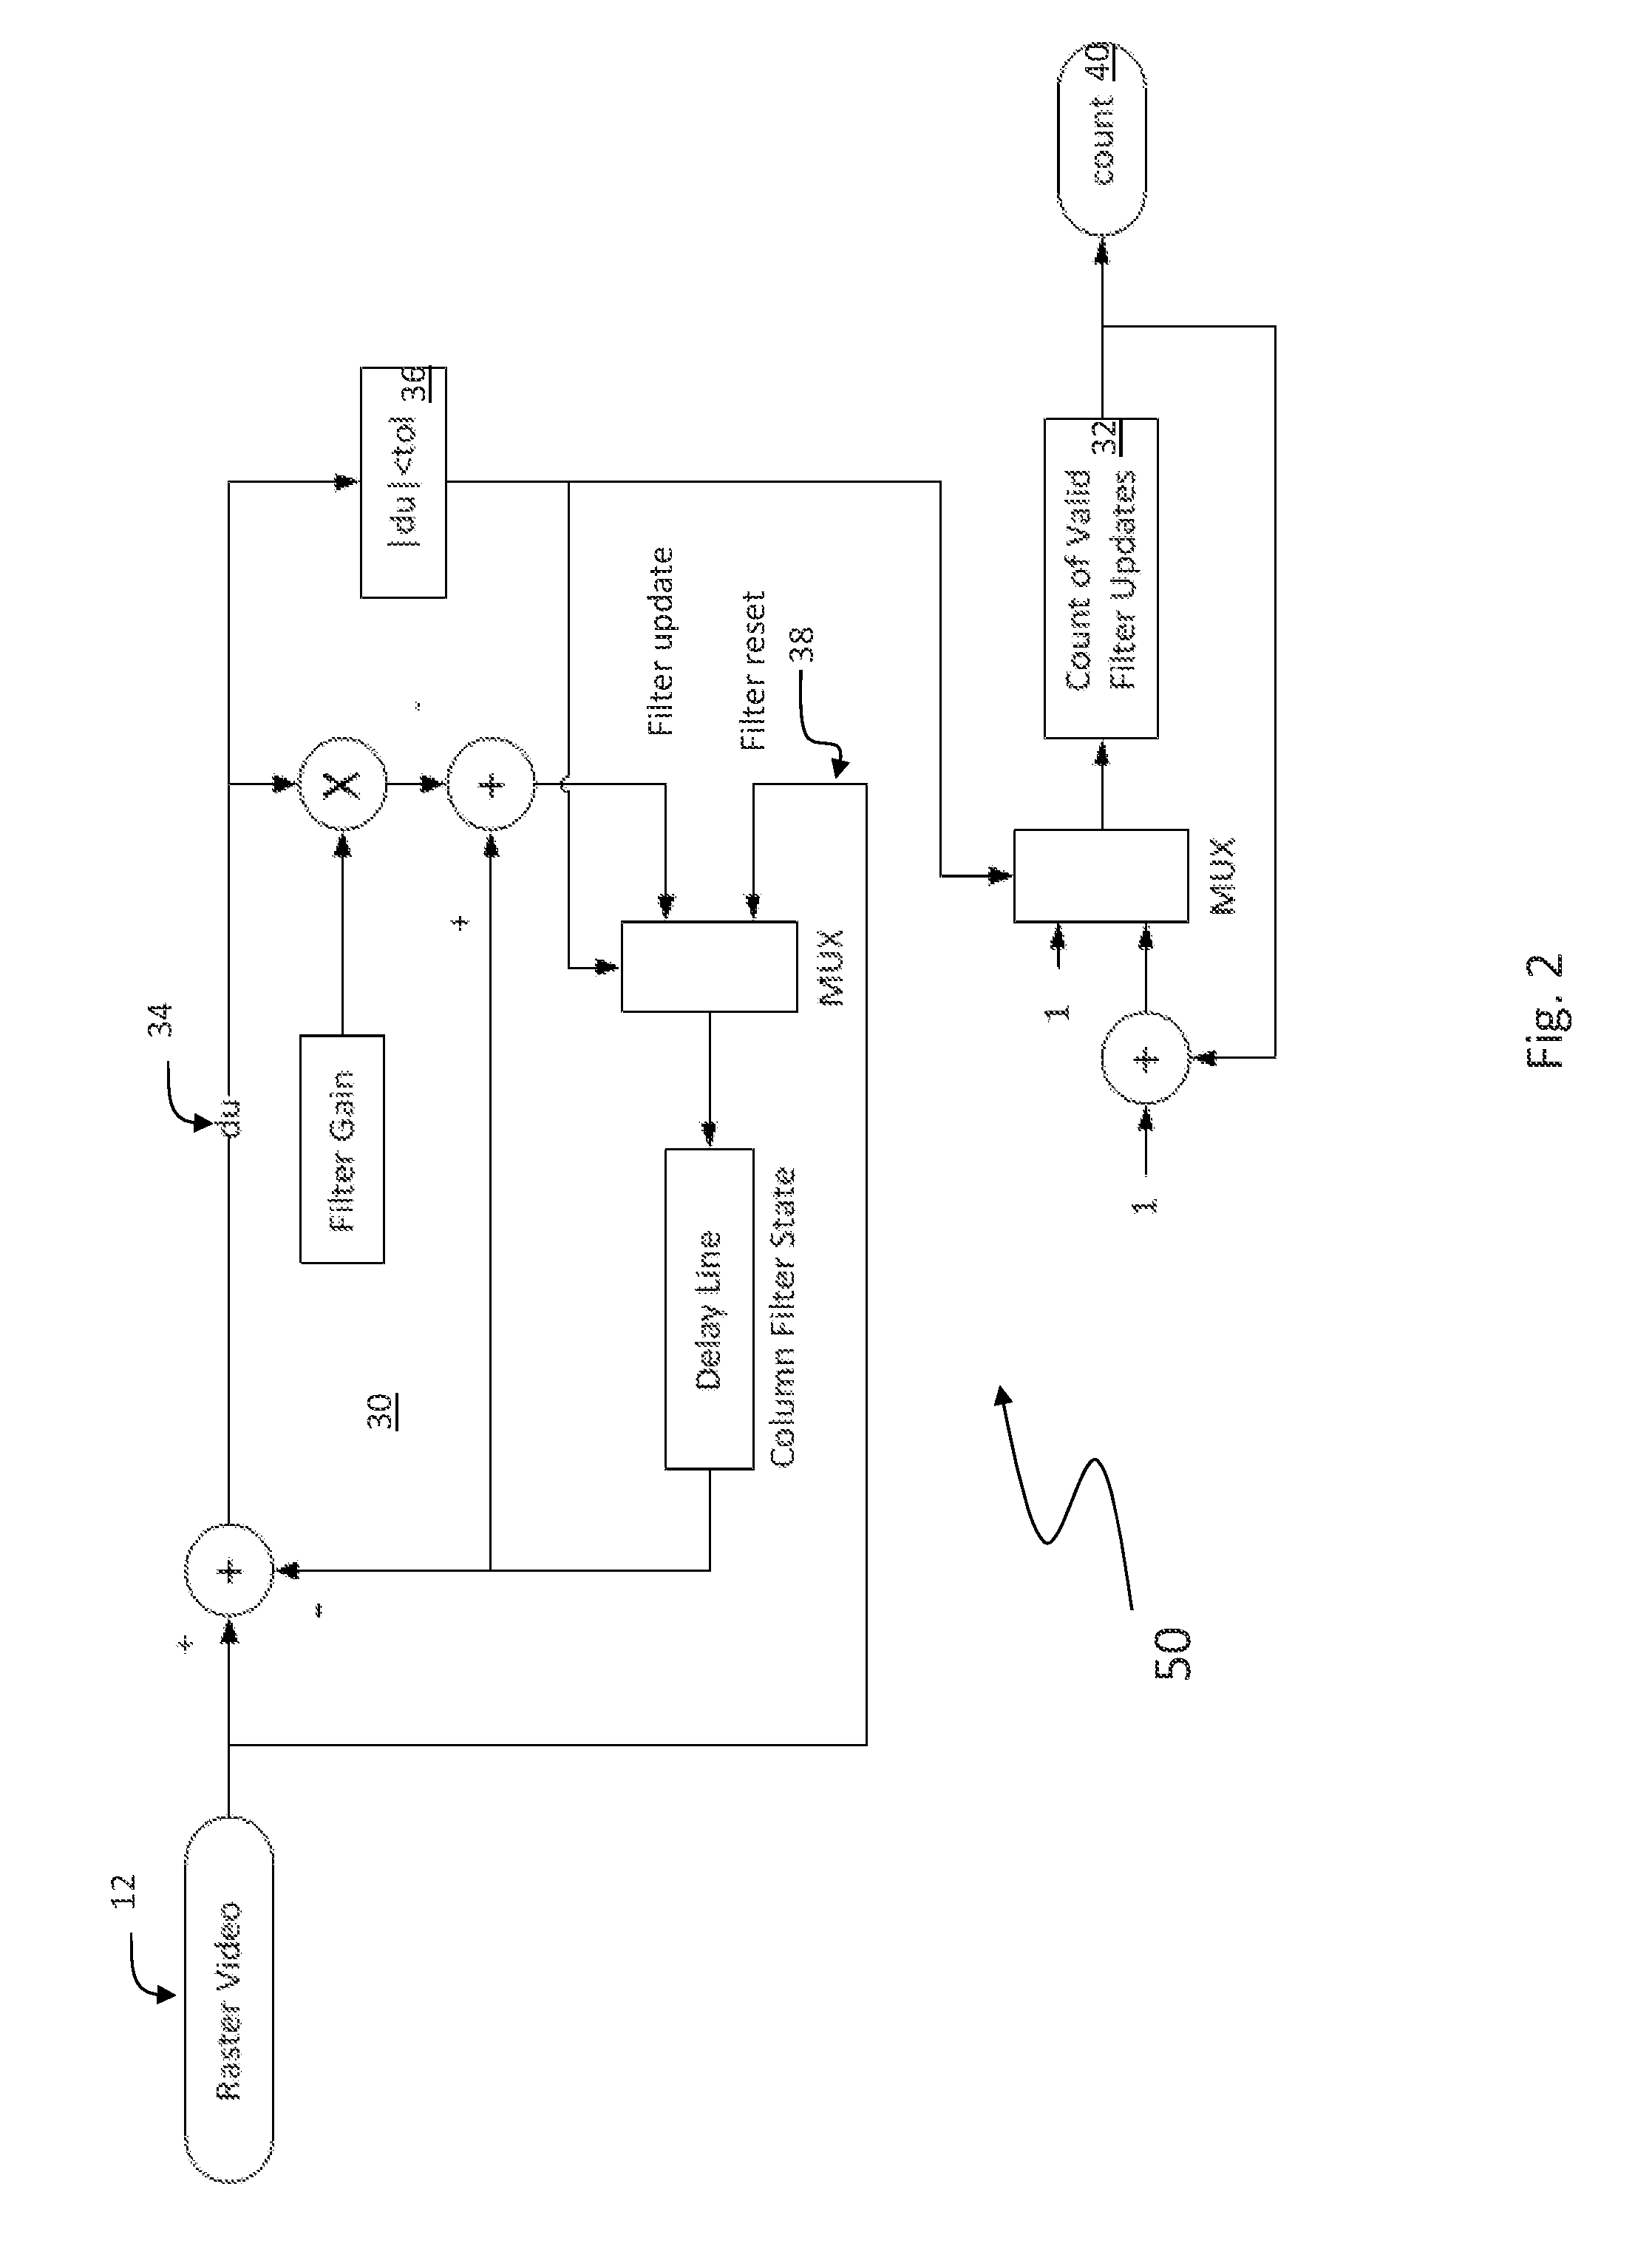 Method for reducing row and column noise in imaging systems